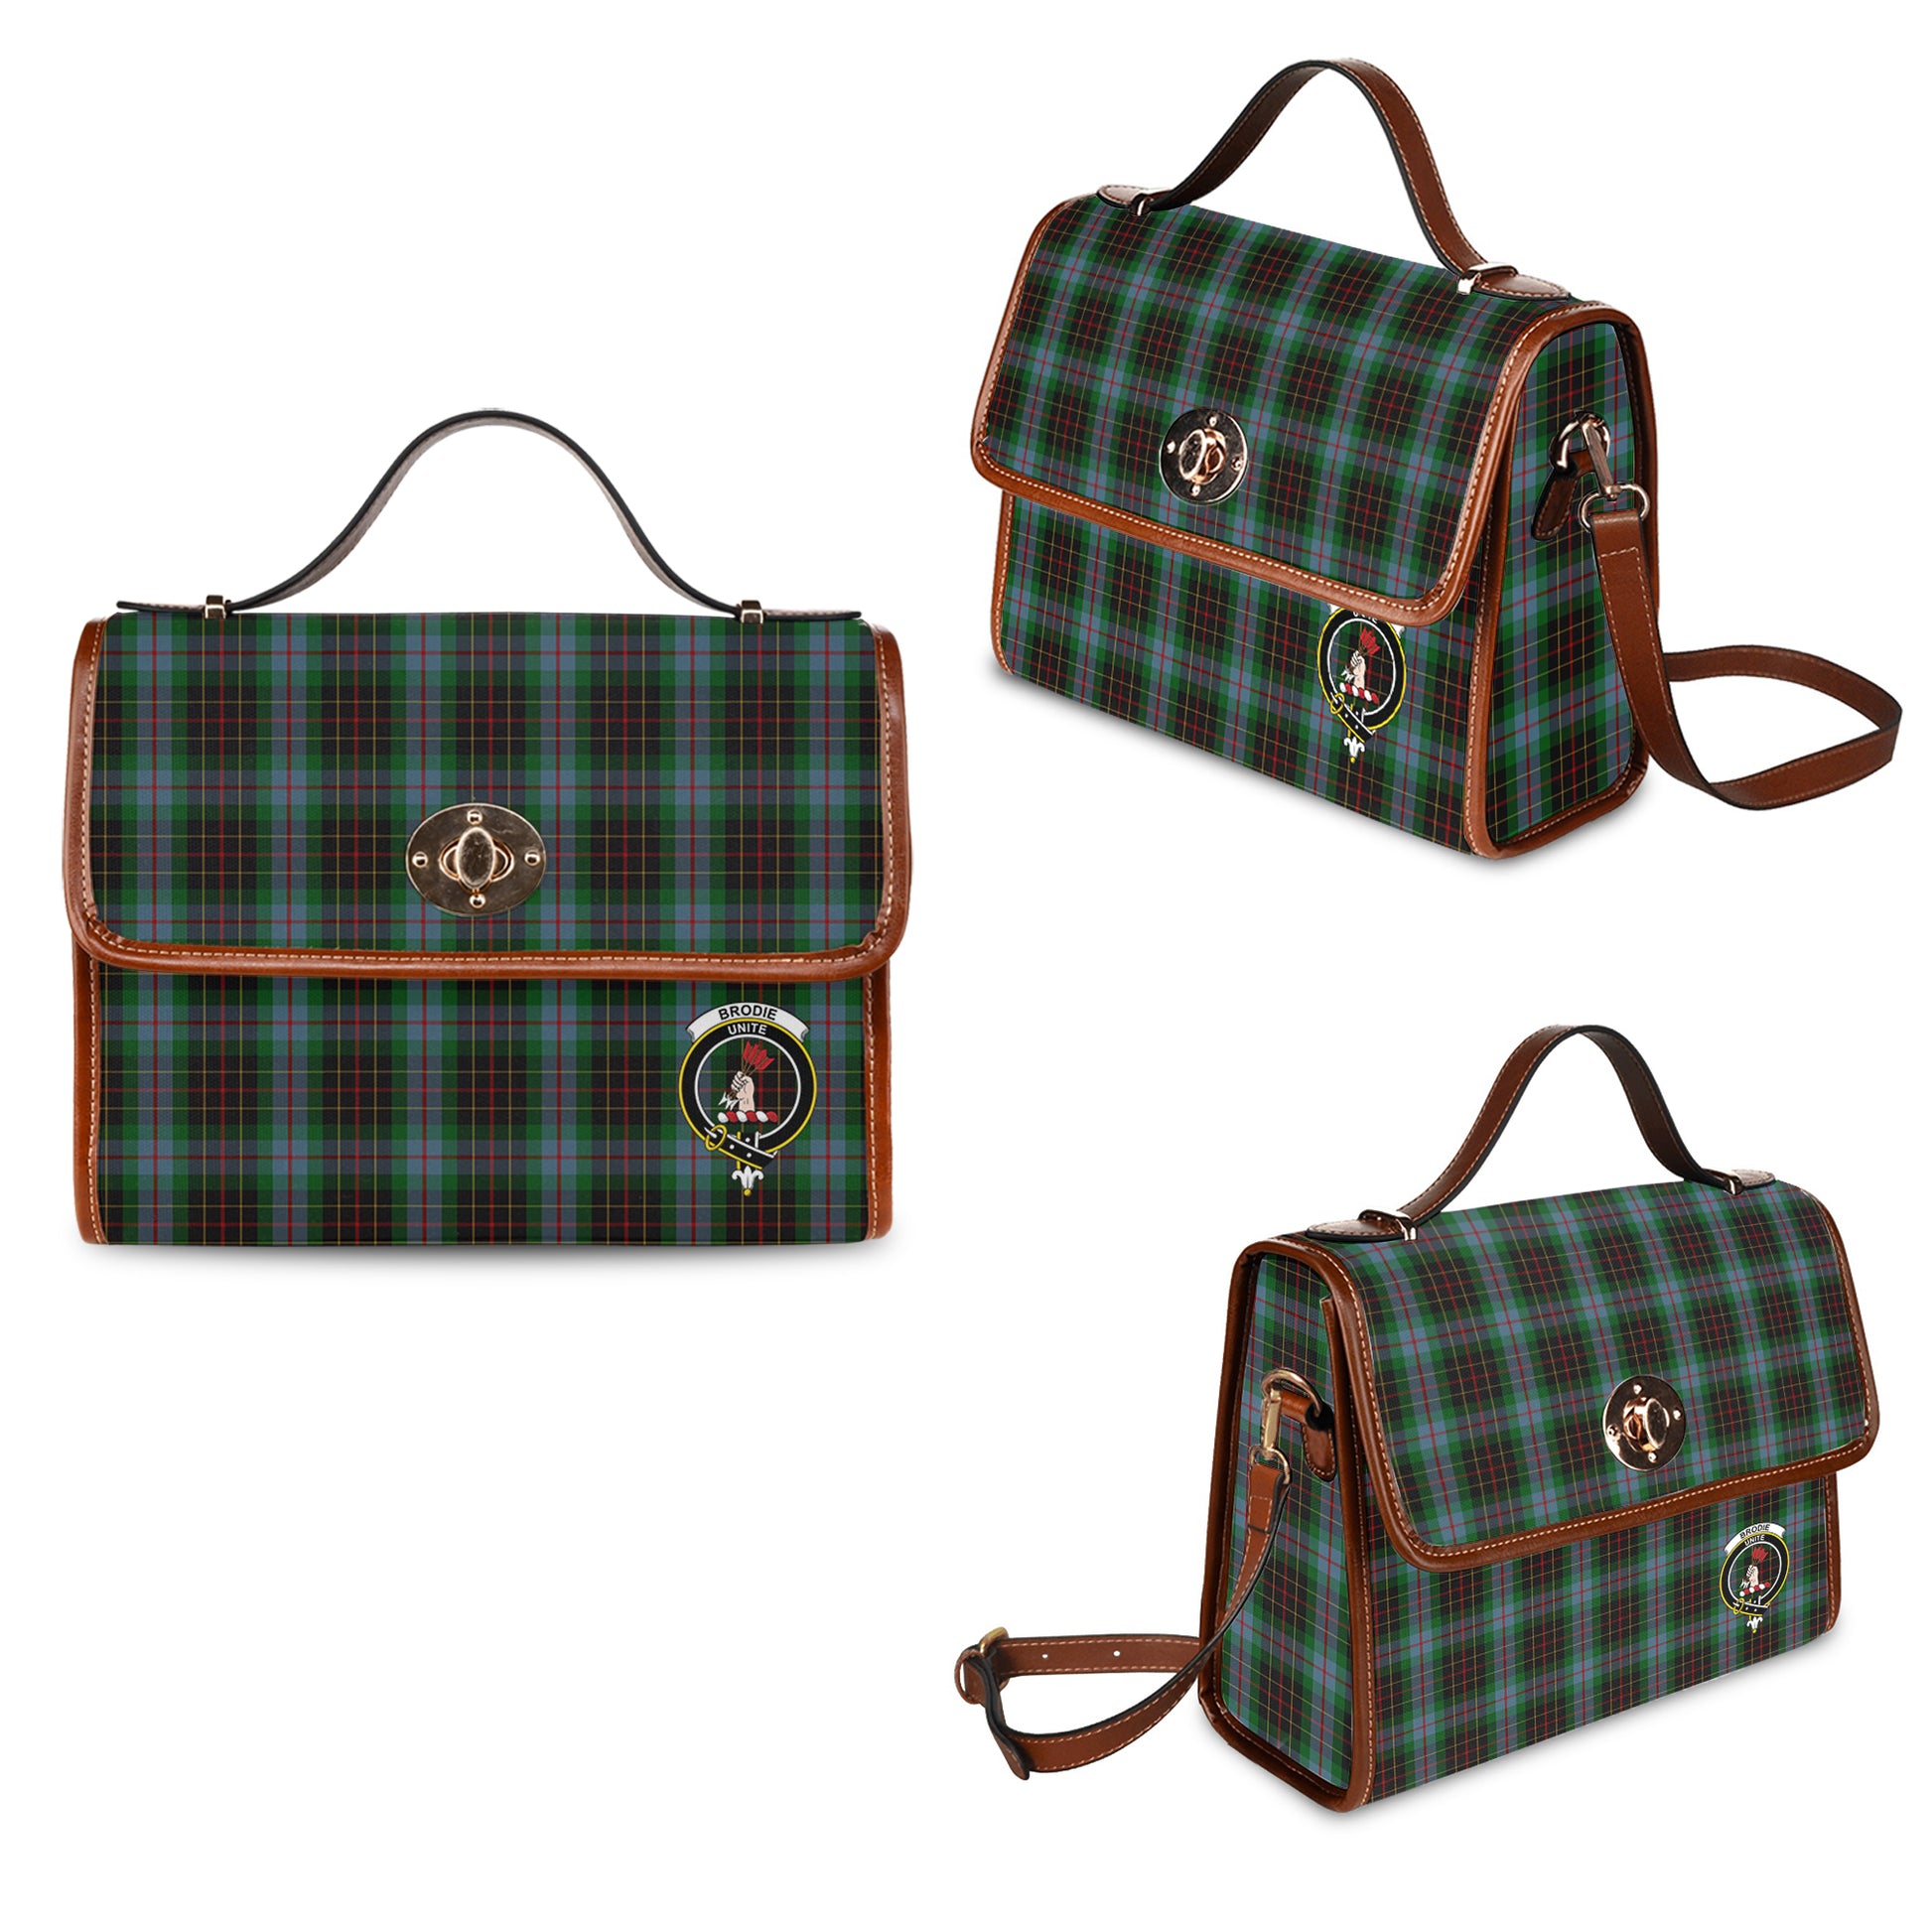 Brodie Hunting Tartan Leather Strap Waterproof Canvas Bag with Family Crest One Size 34cm * 42cm (13.4" x 16.5") - Tartanvibesclothing